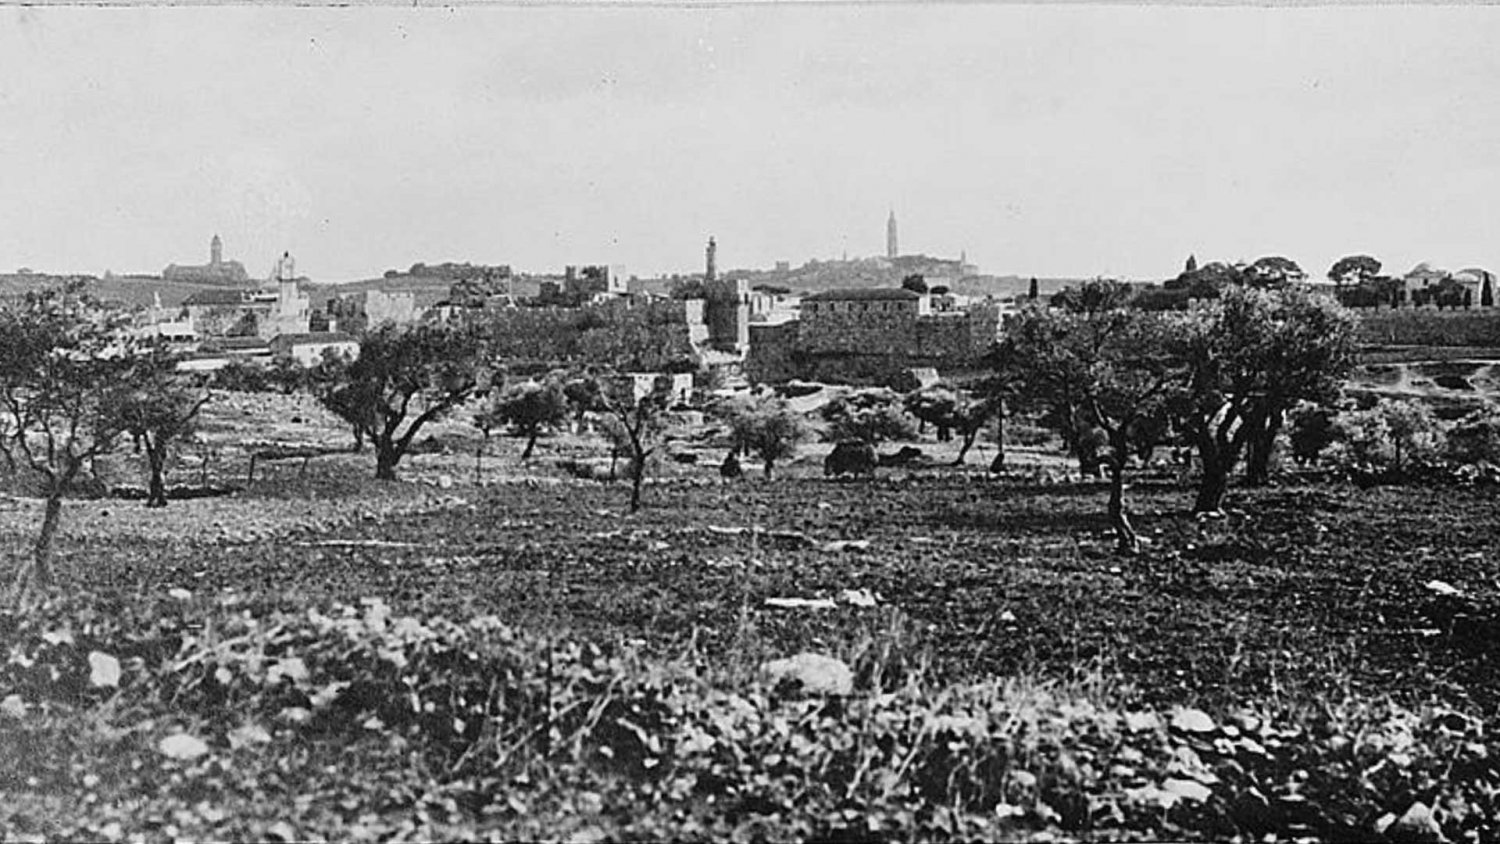 The plot of land known as Nukofrieh and owned by the Greek Orthodox Church, on which the Jerusalem YMCA was built